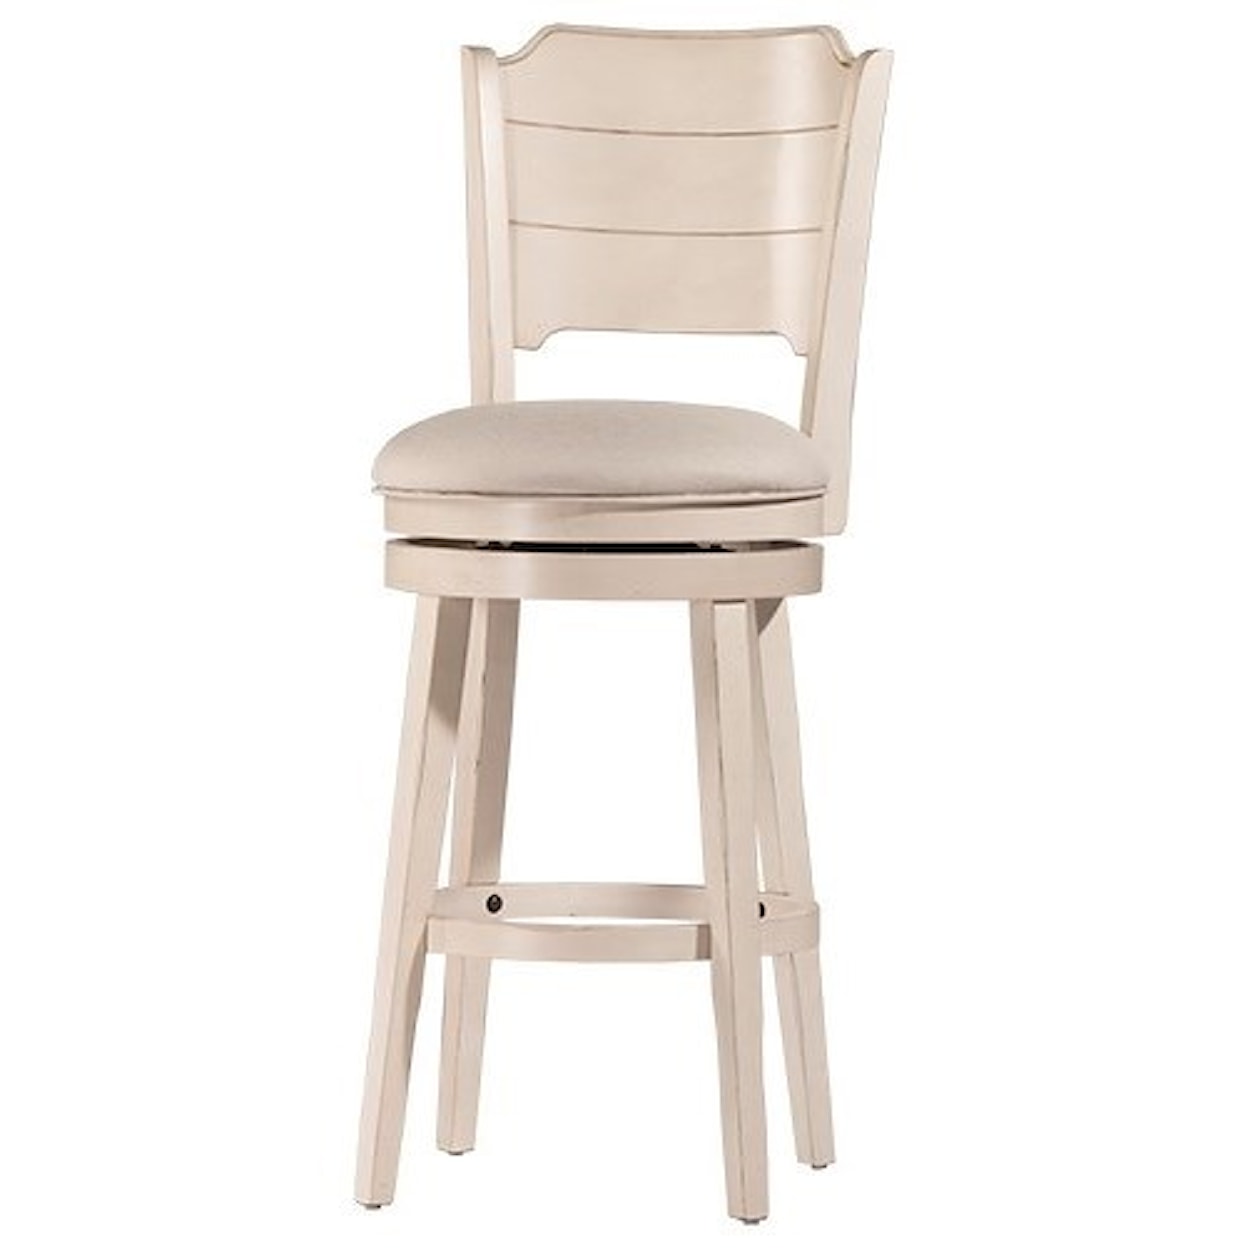 Hillsdale Clarion Swivel Counter Stool